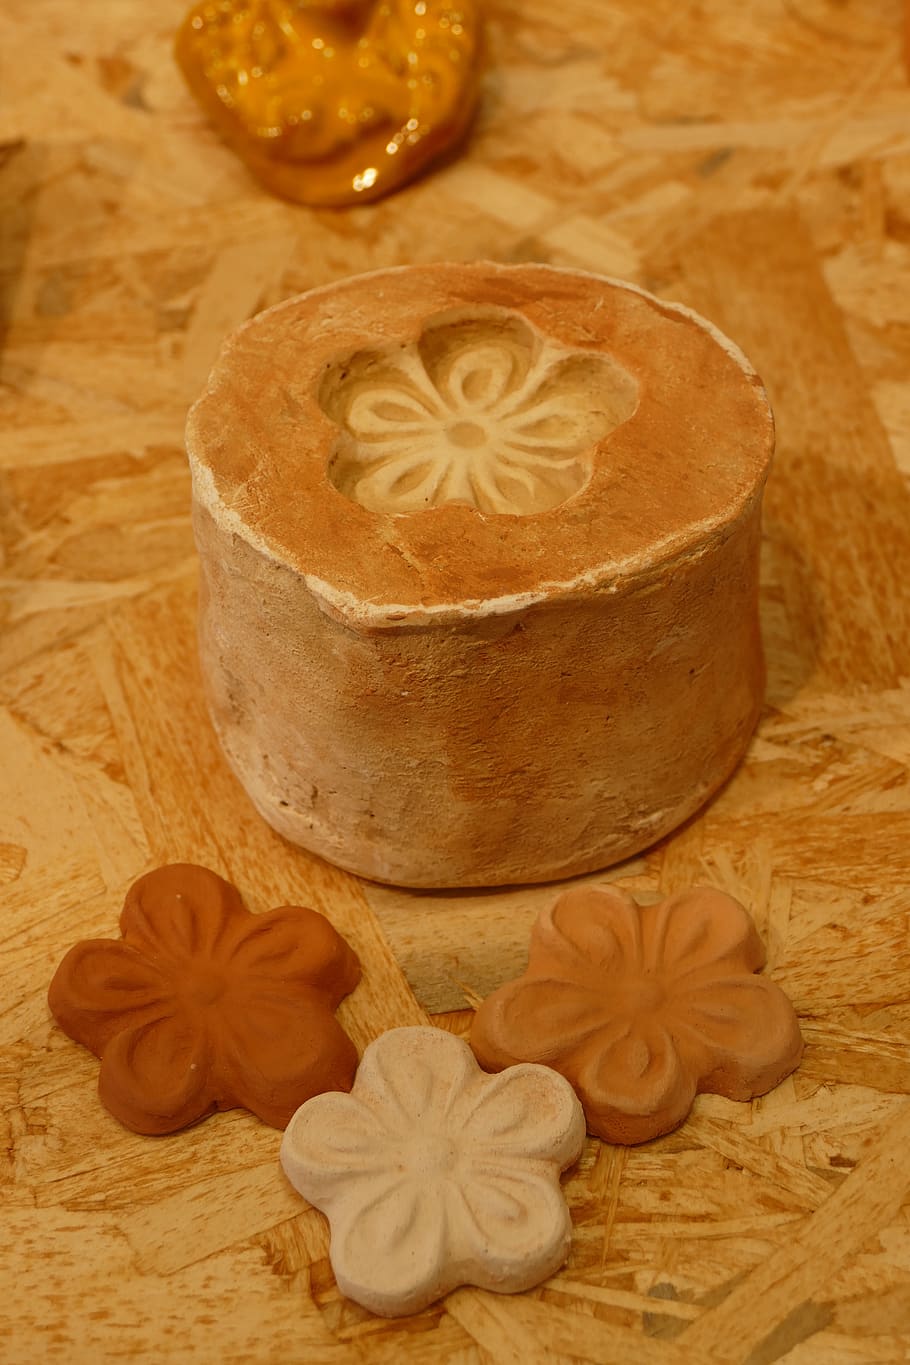 shape, mold, print, flower, clay, pottery, crafts, decoration, food and drink, food